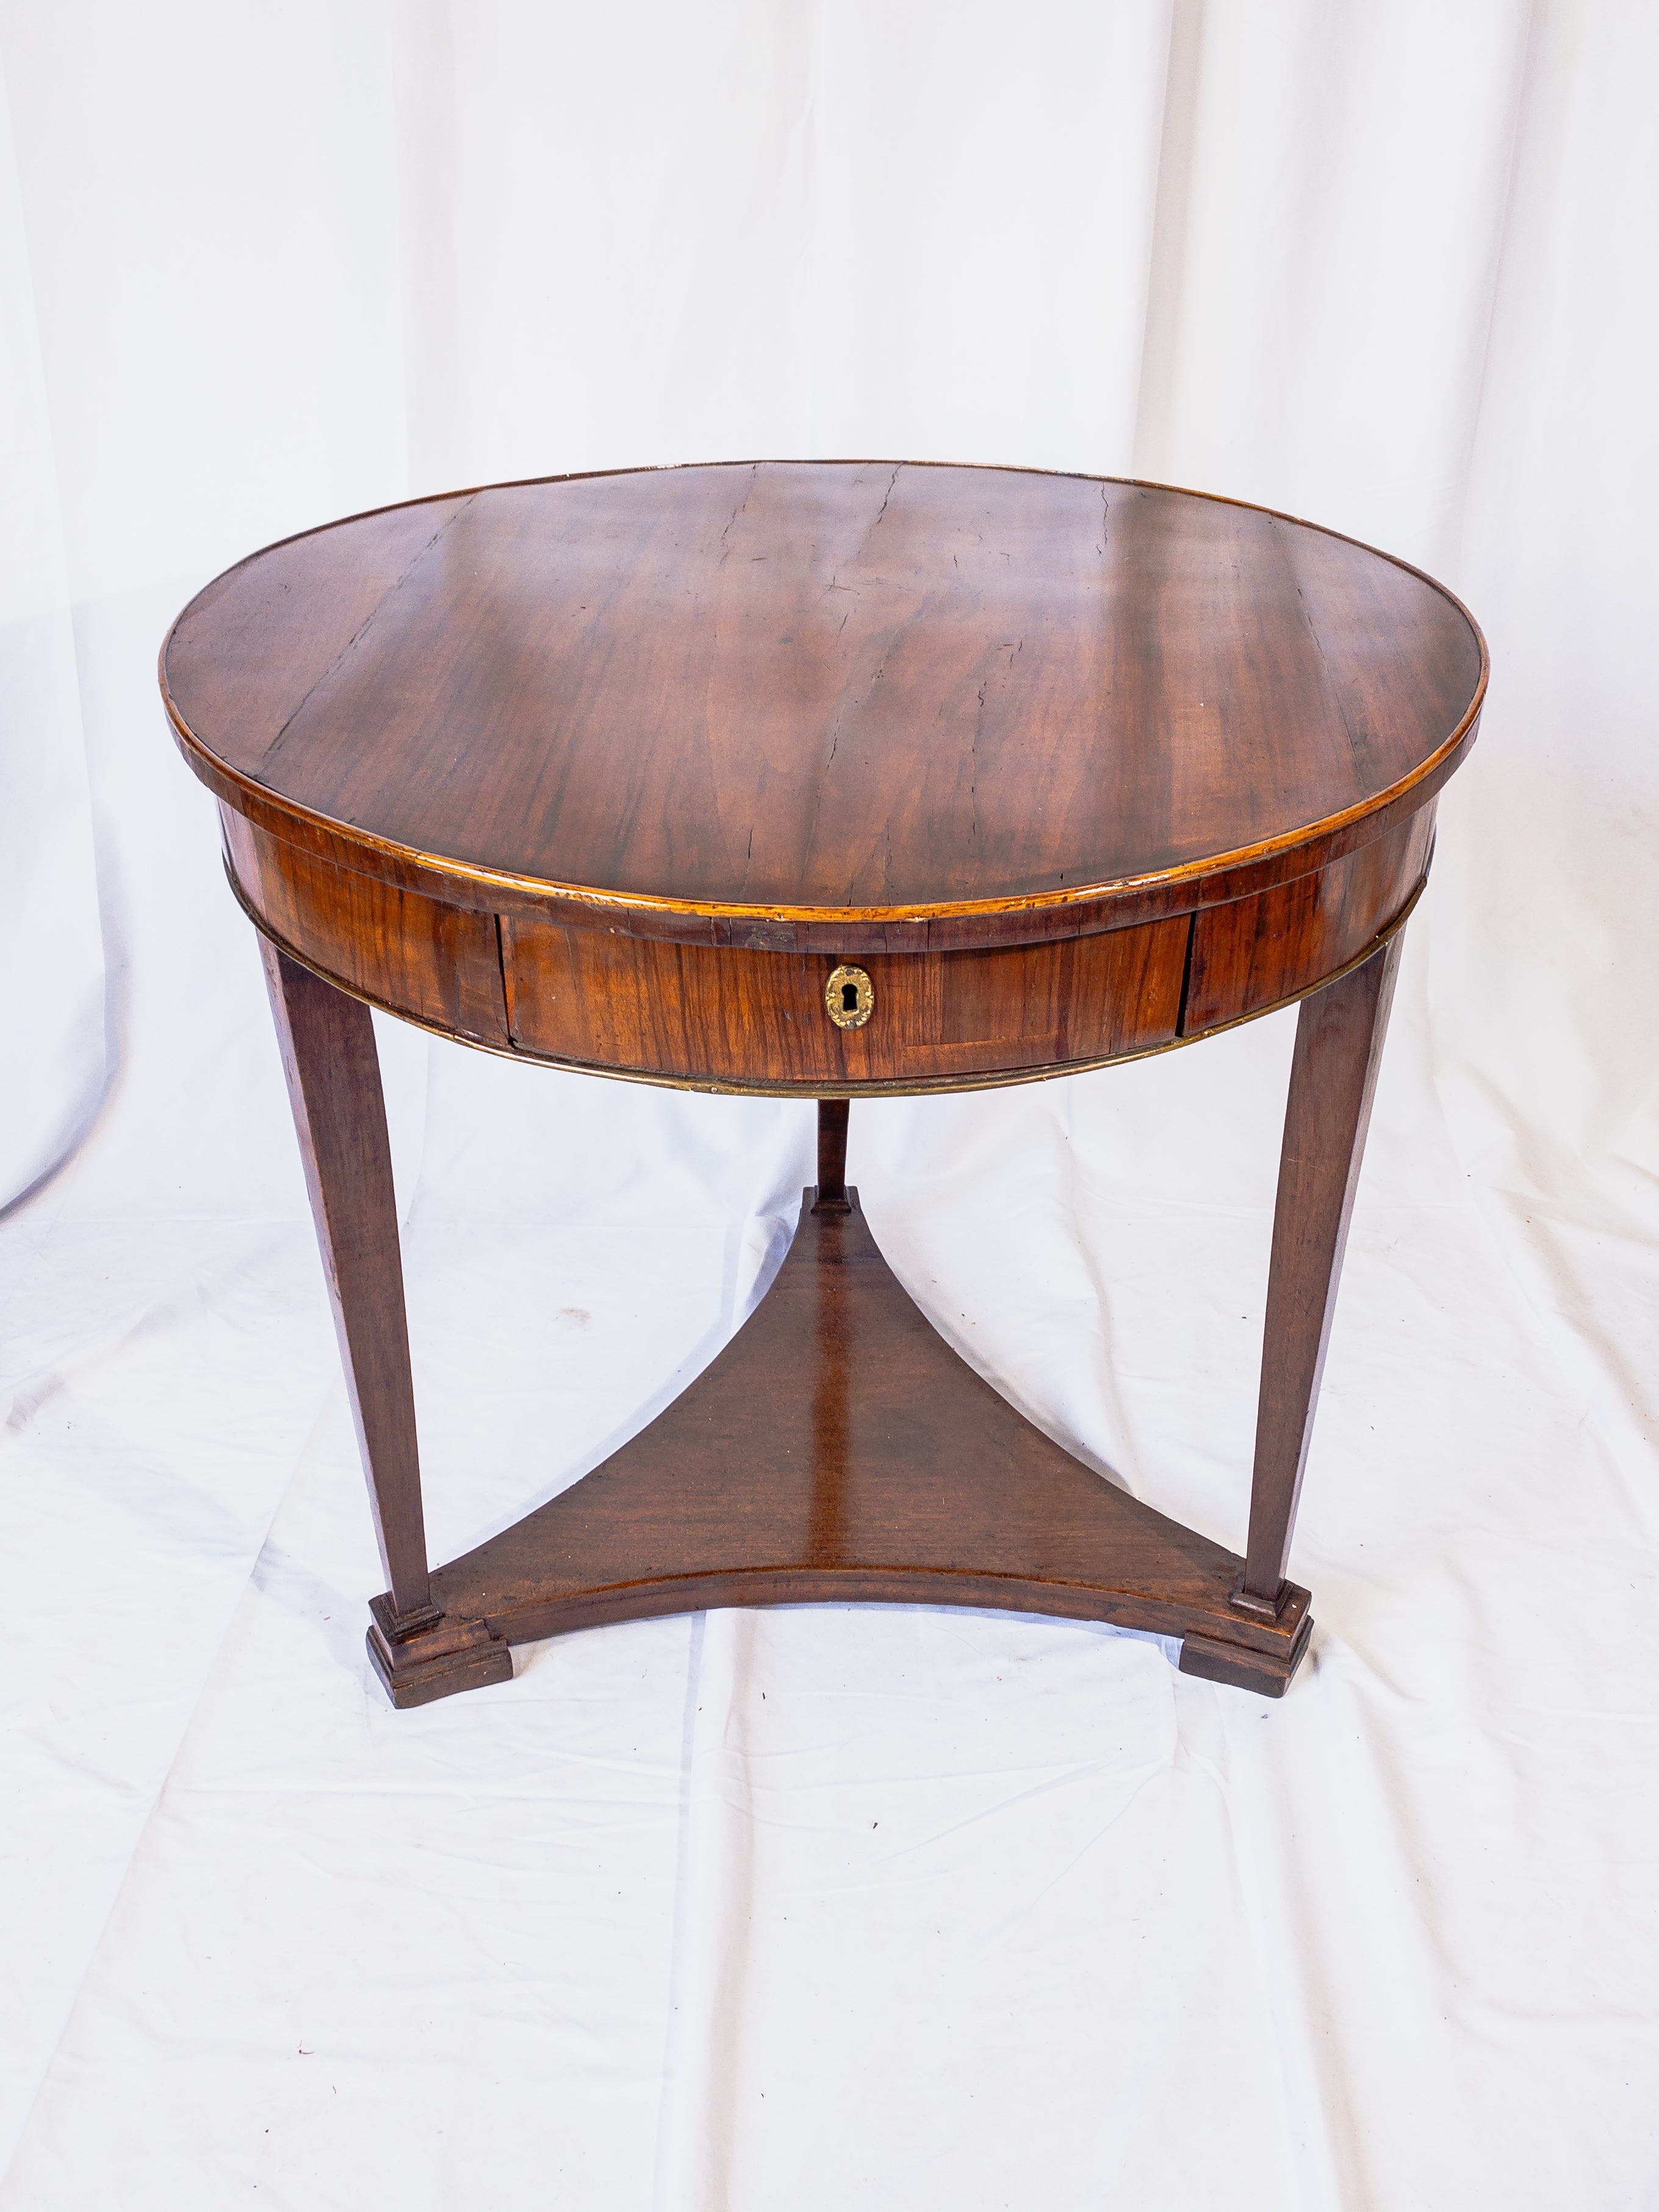 A remarkable piece of 19th-century craftsmanship, this Italian Walnut Round Wooden Table boasts both functionality and beauty. Its round top, crafted from rich walnut wood, showcases the warmth and depth of the material, inviting tactile